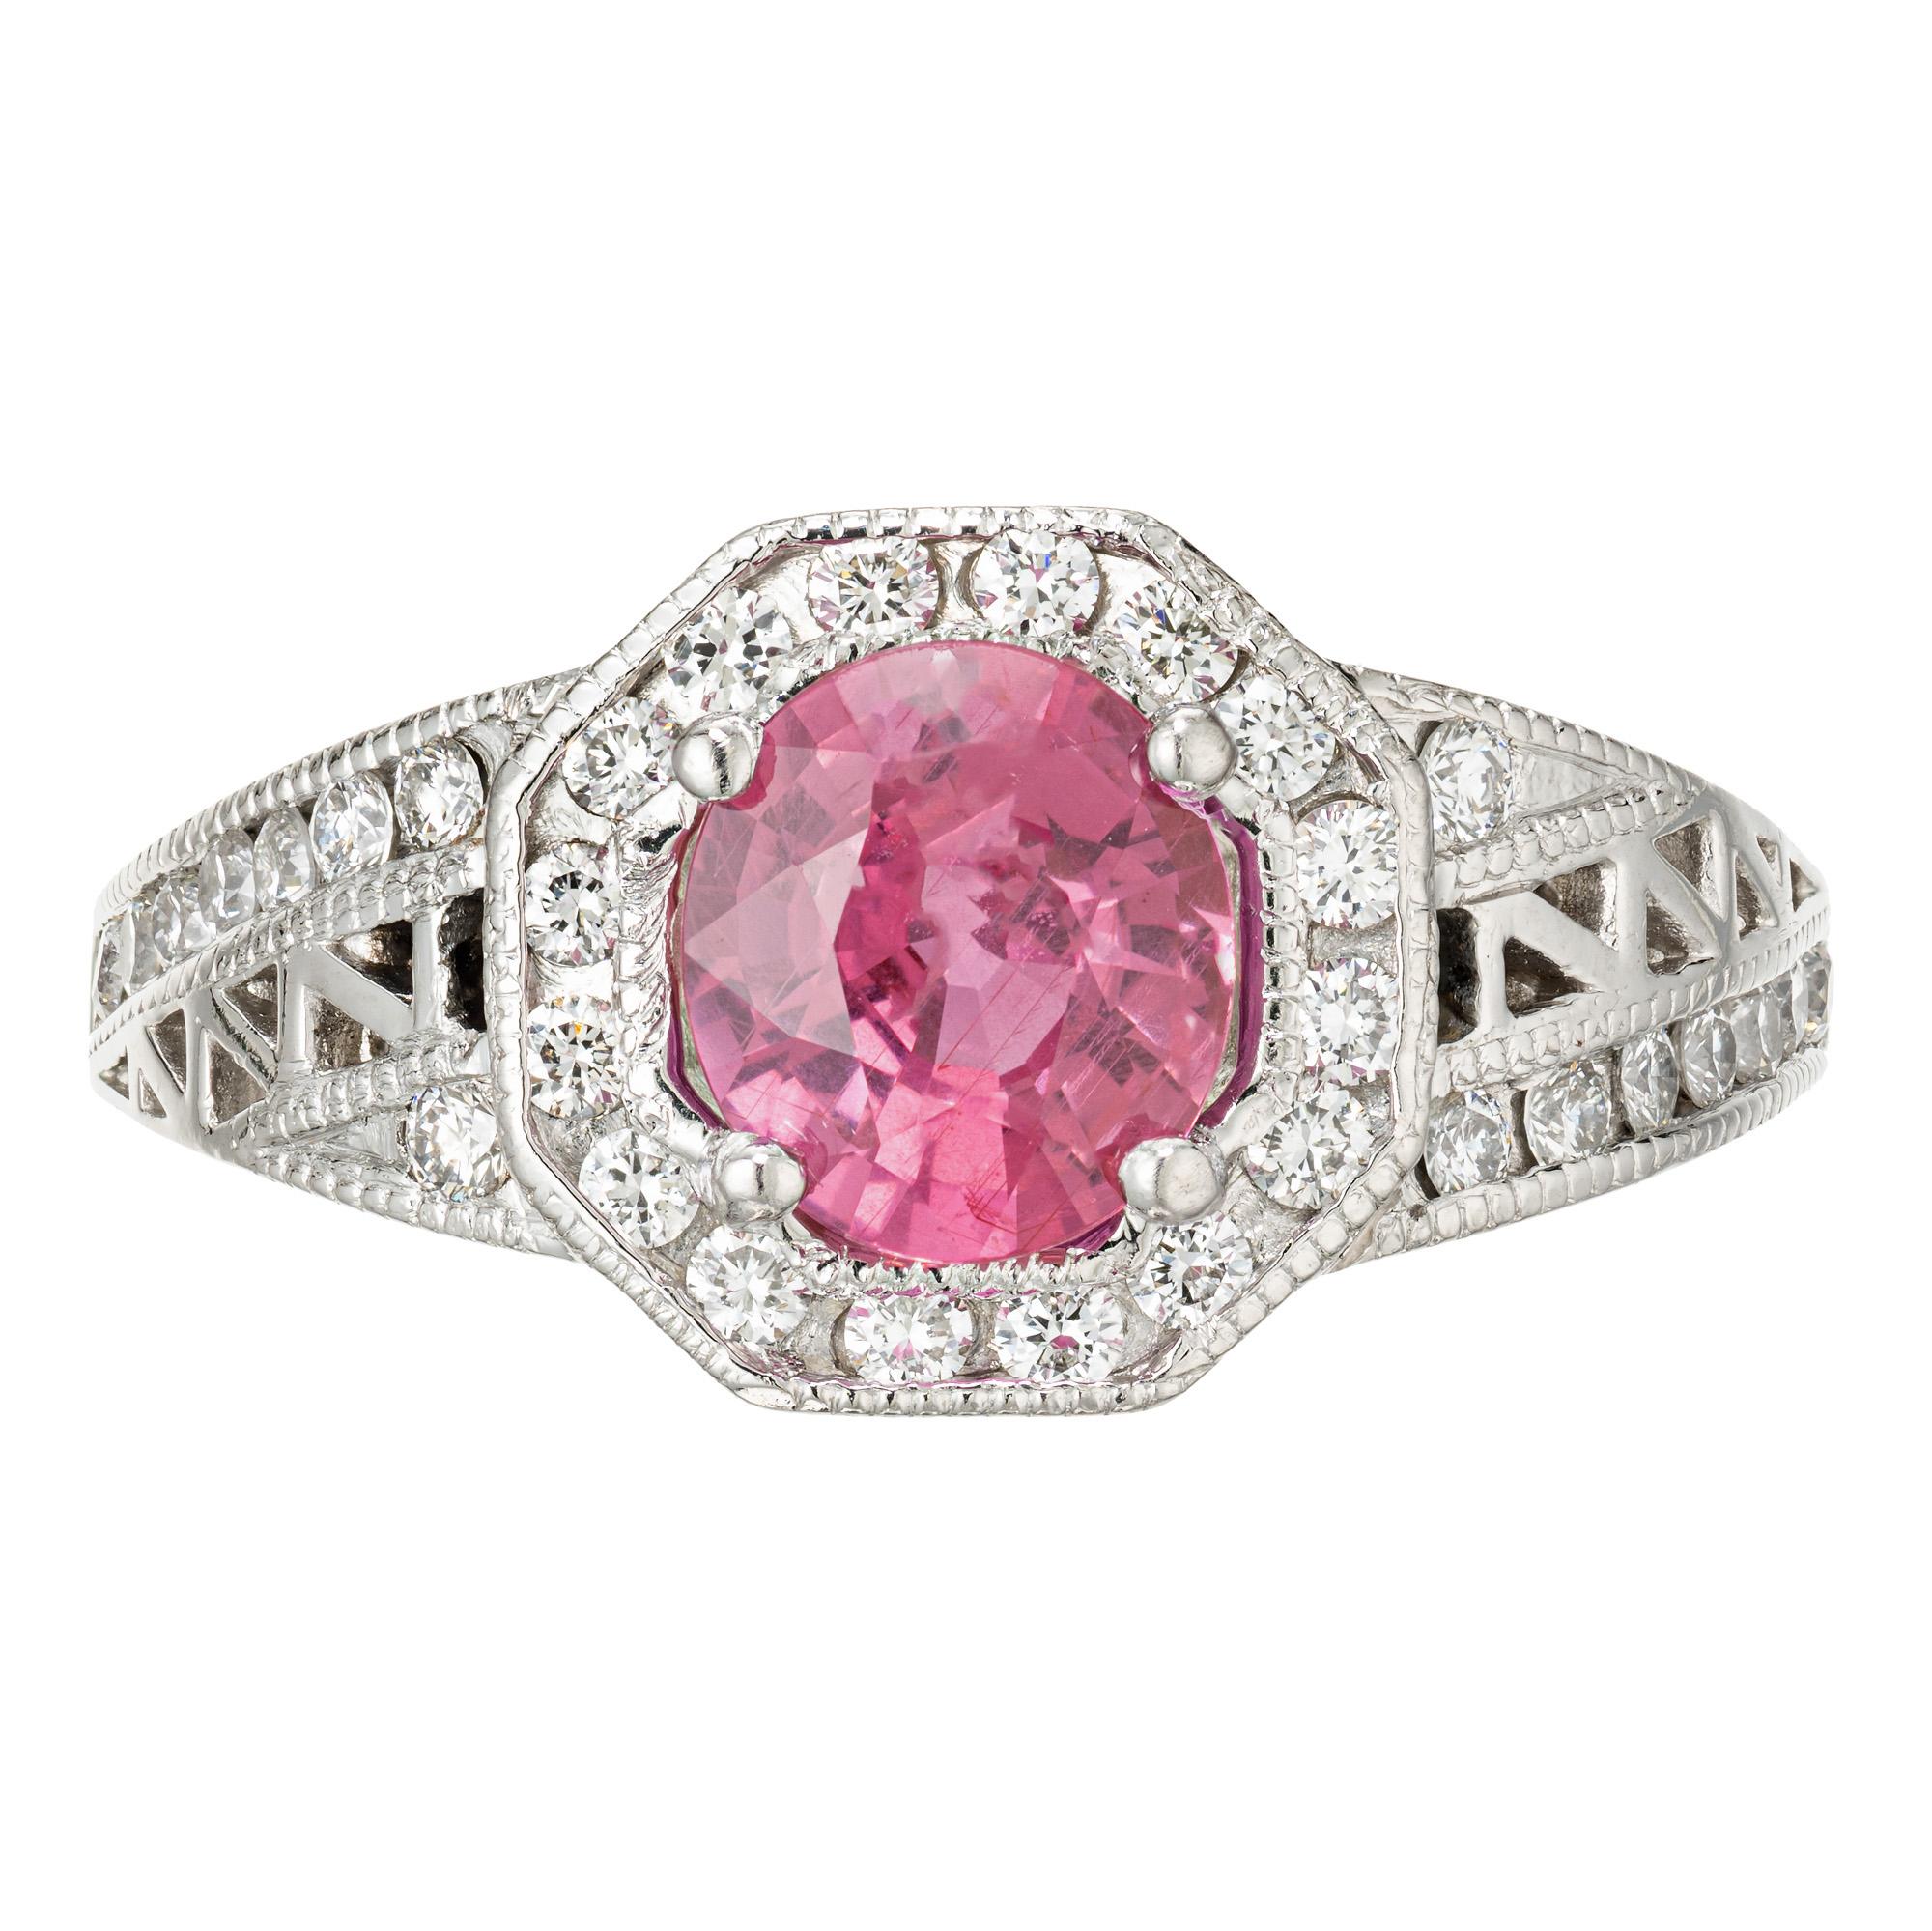 Art Deco original Halo style hot pink Sapphire engagement ring. GIA certified no heat, no enhancement 1.12 hot pink sapphire center stone. Set in its original 1940's platinum setting accented with 34 full cut round diamonds. 

1 oval hot pink